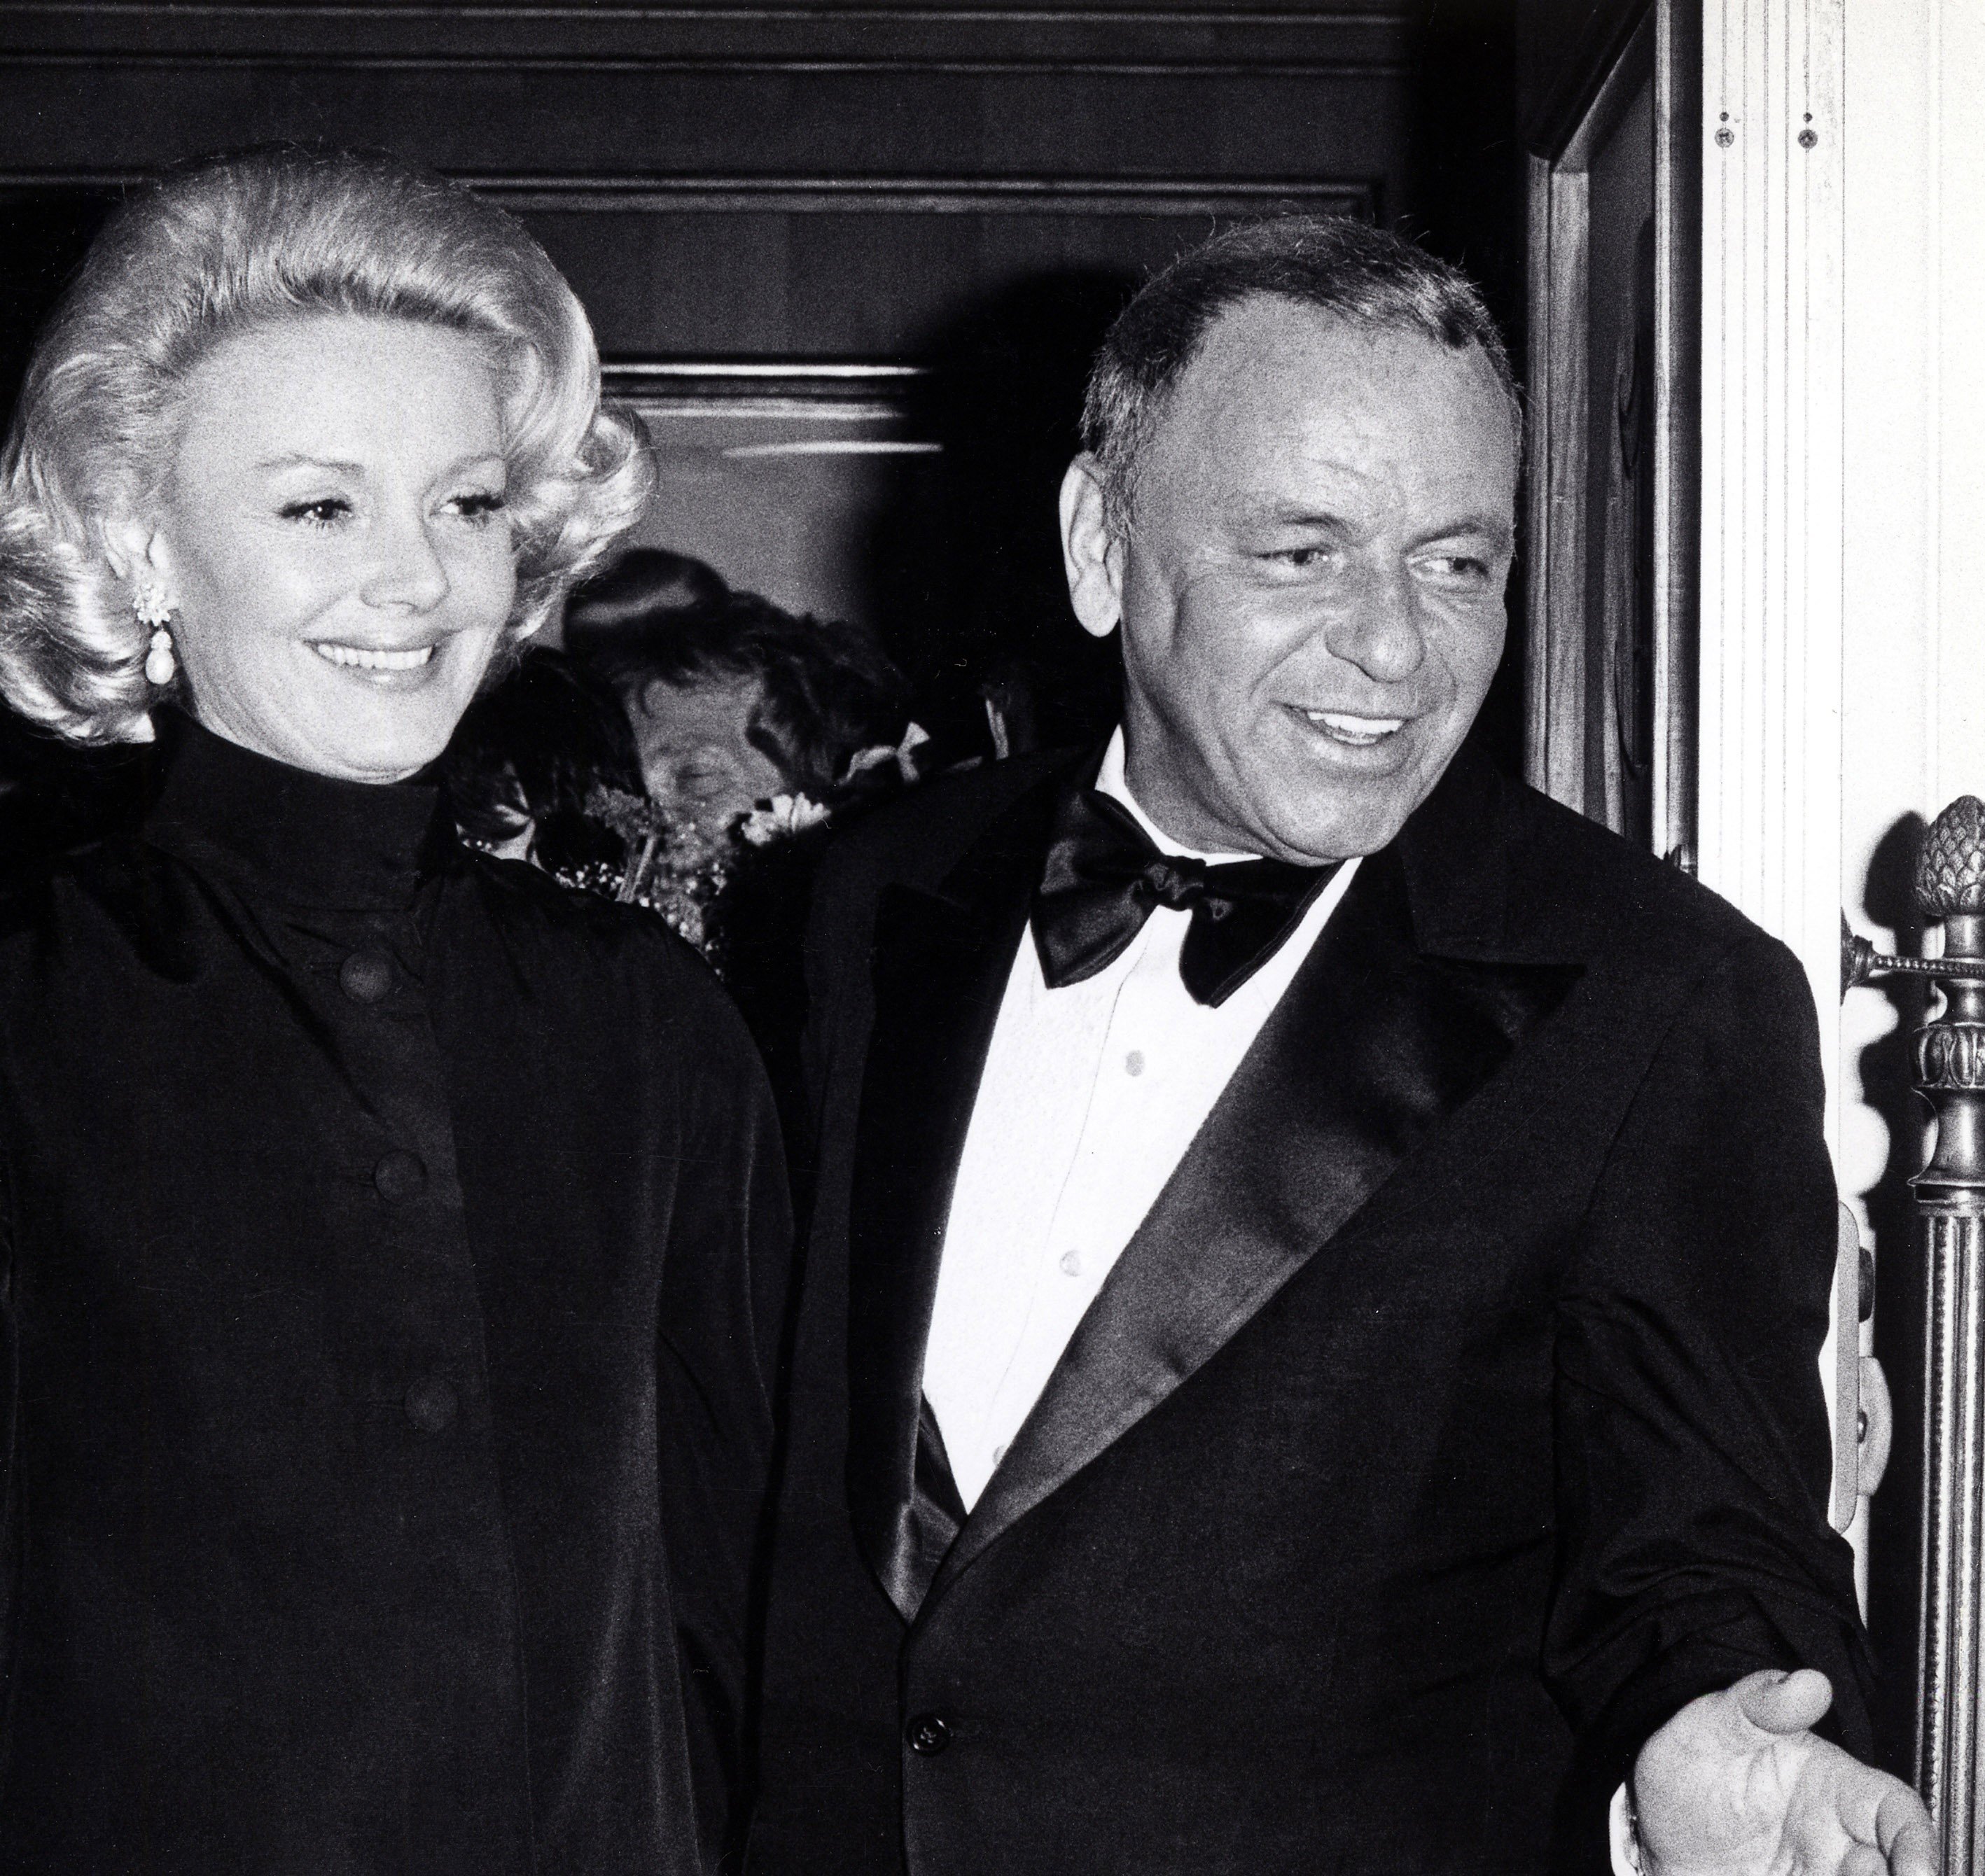 A black and white photo of Frank Sinatra and his wife Barbara Sinatra leaving the Oscars. They both smile.